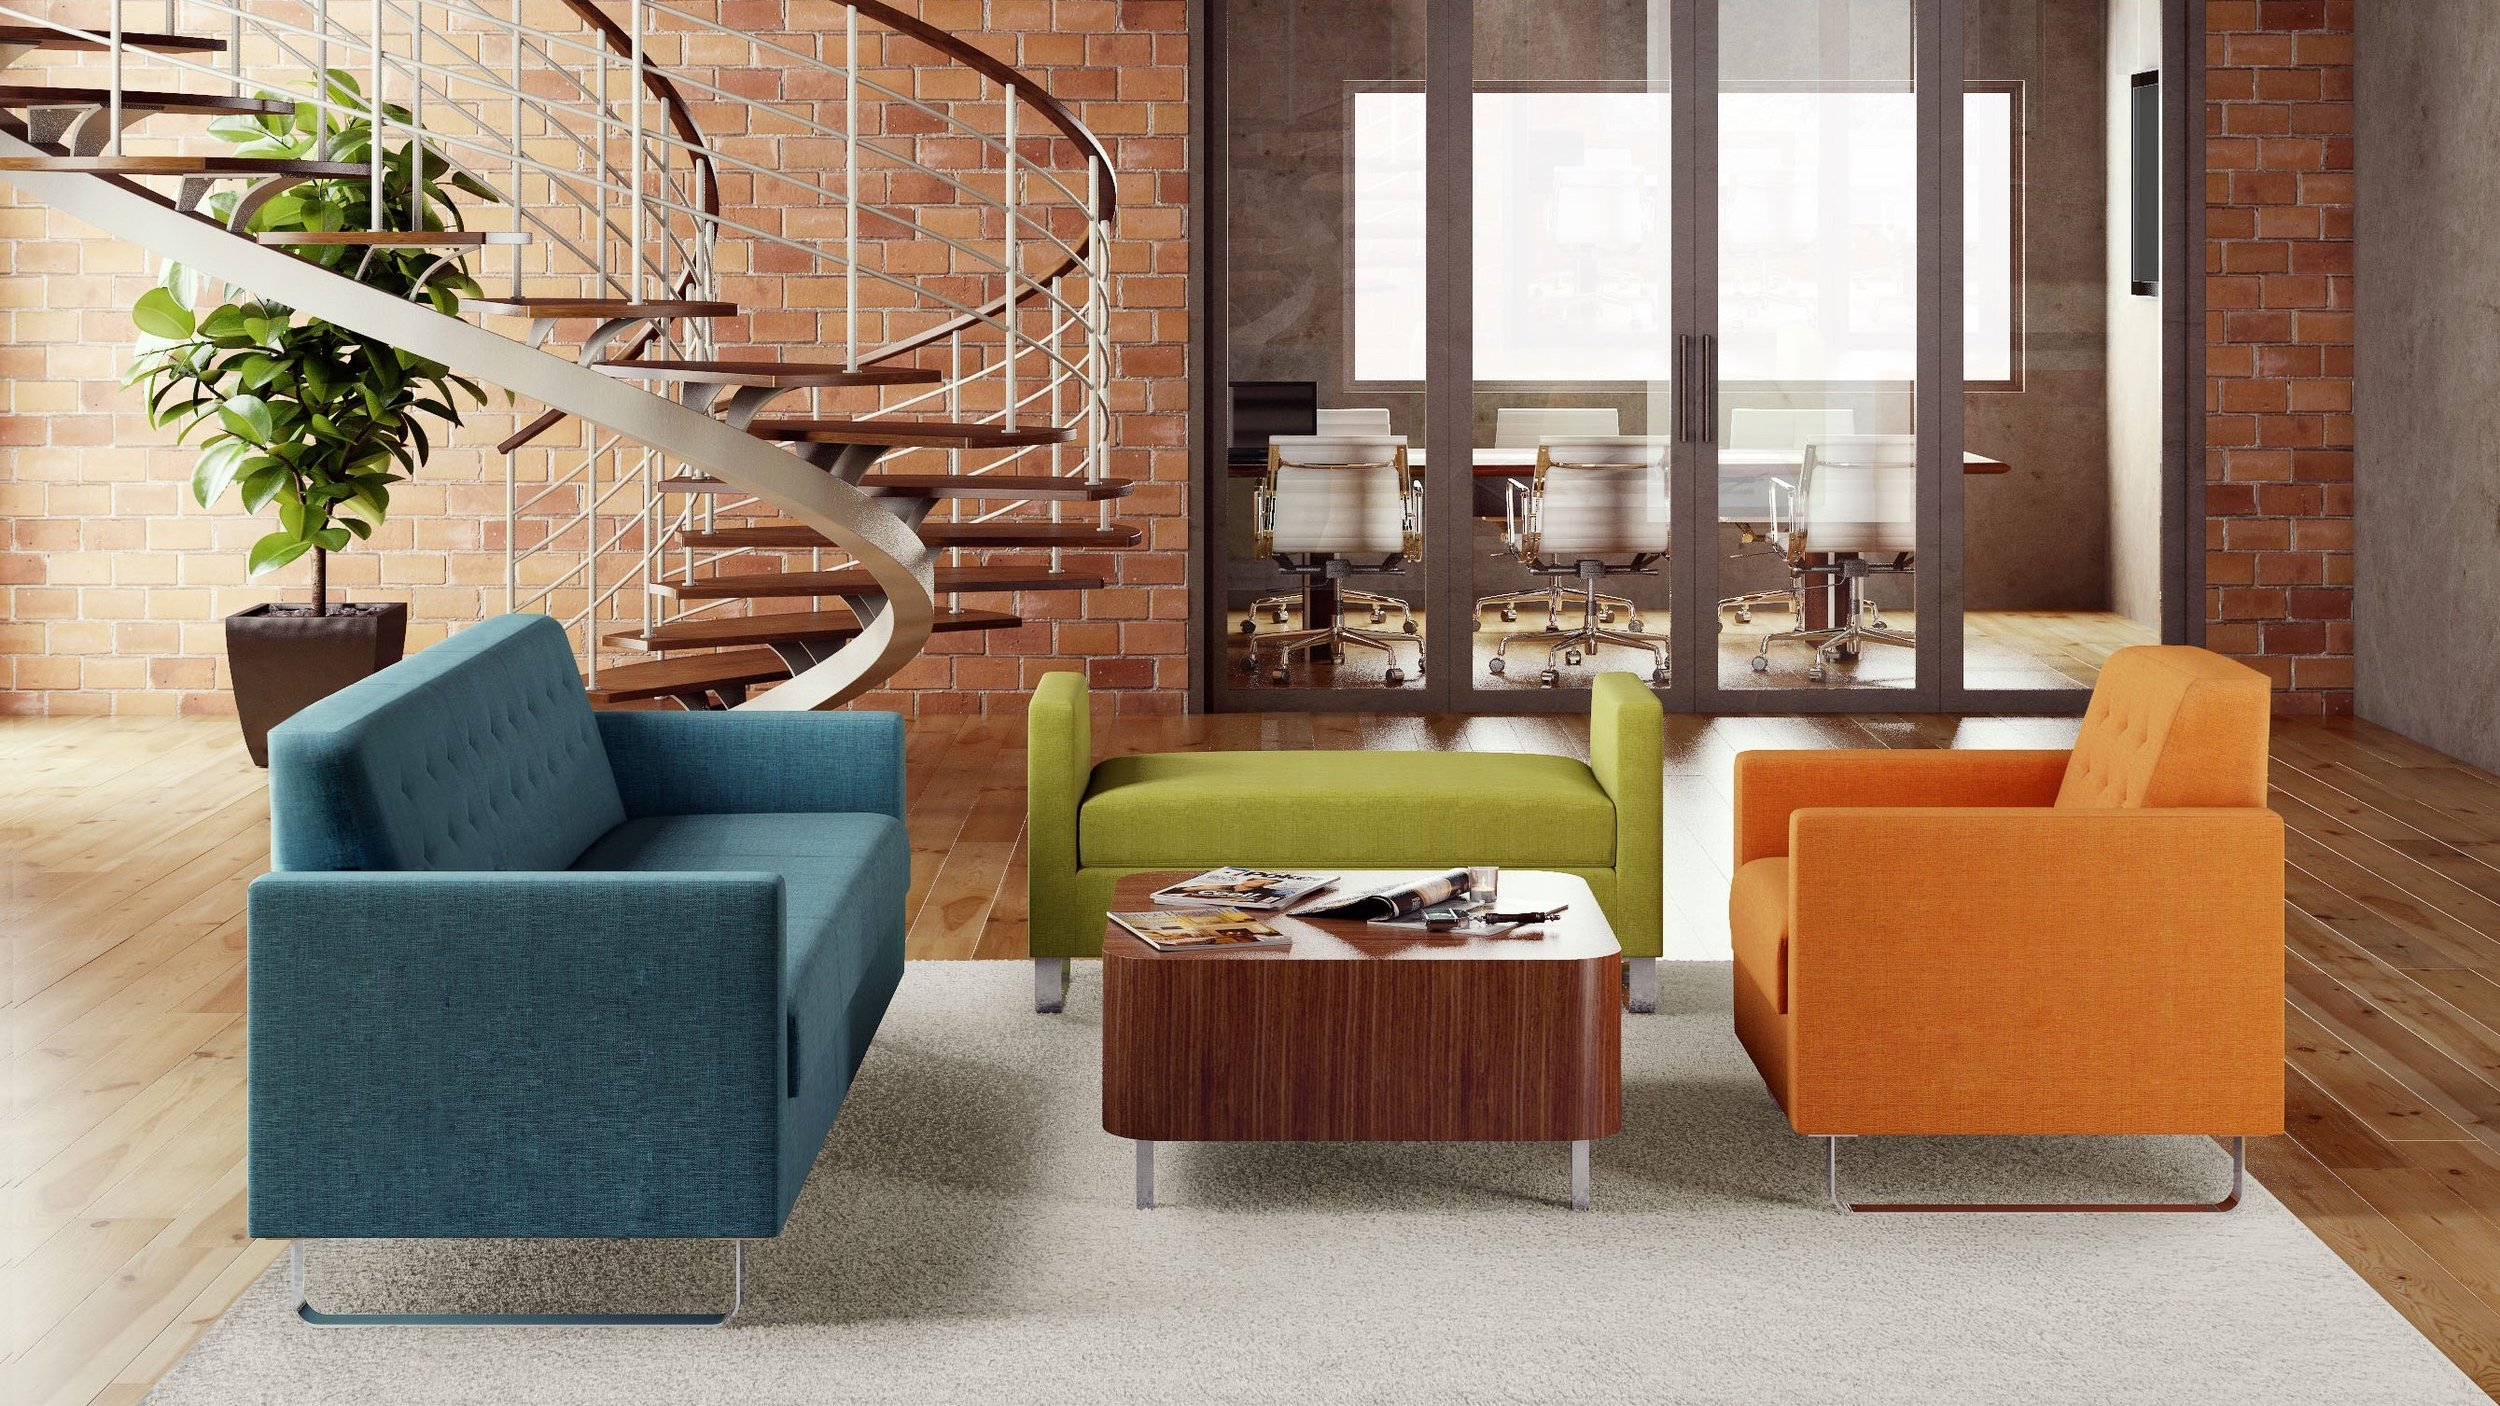 9035-B48 SHOWN WITH ALBANY LOUNGE CHAIR SOFA + ALBANY LOUNGE CHAIR + ALBANY CUBE OCCASIONAL TABLE